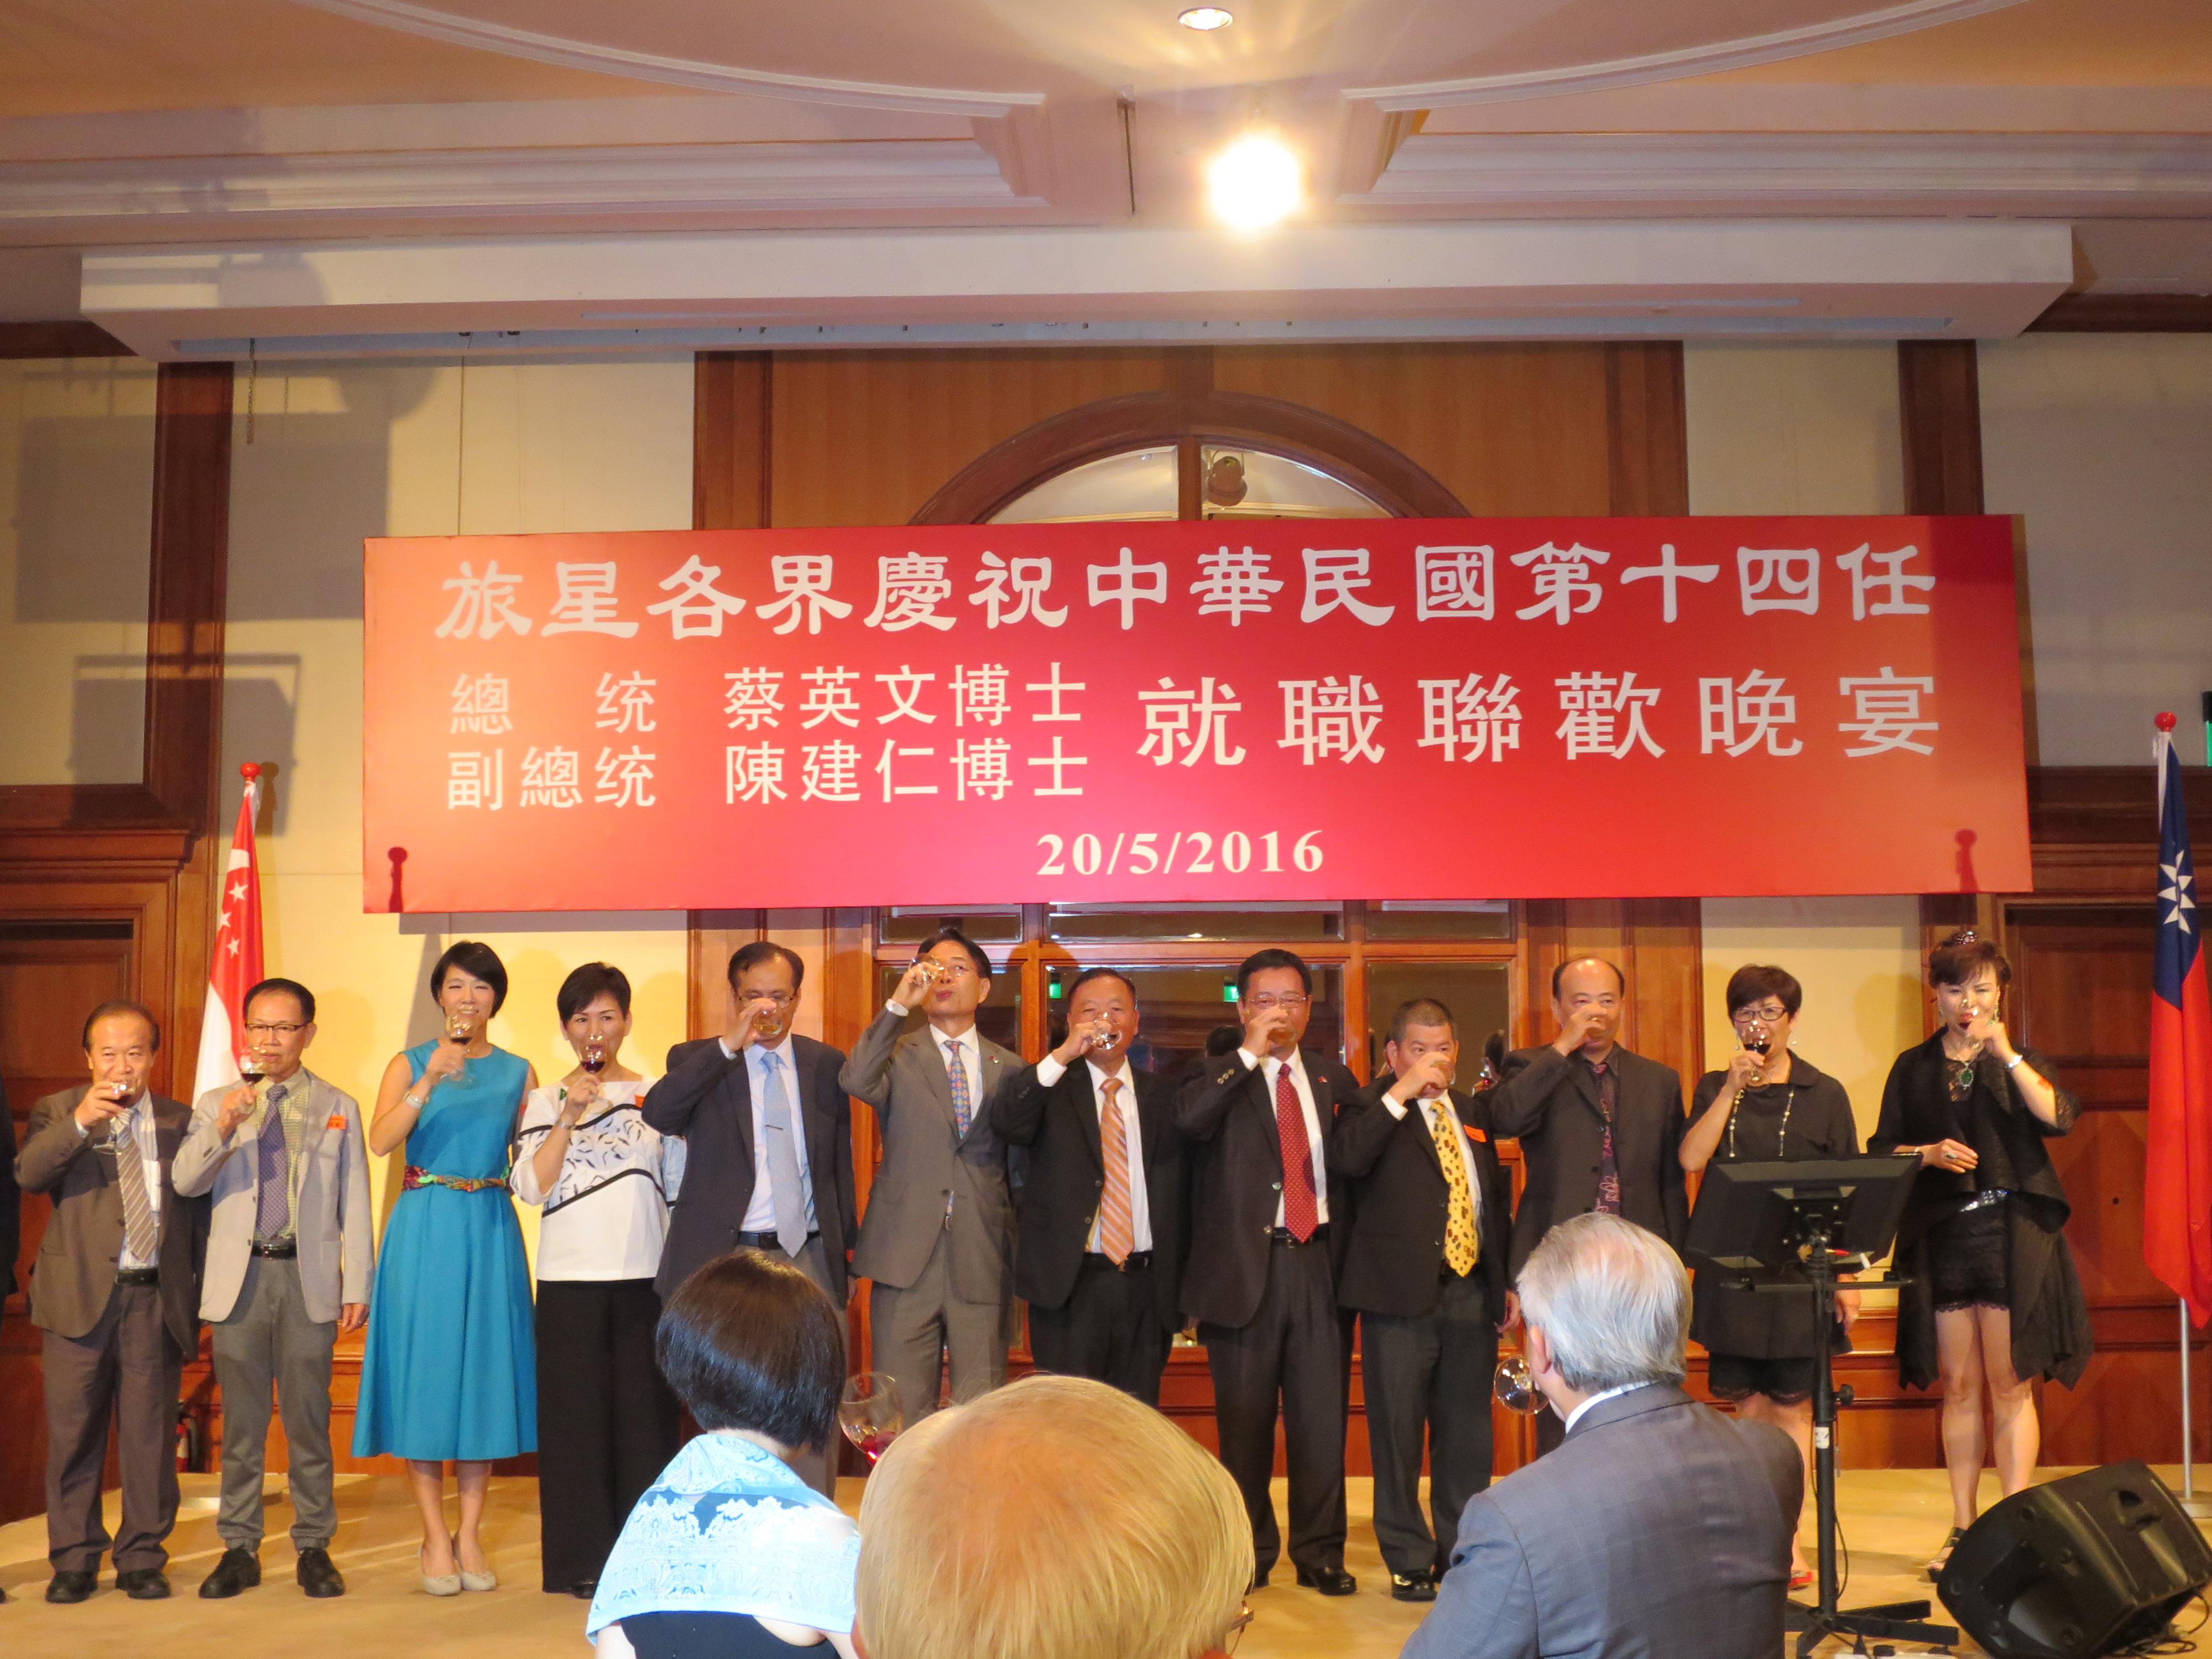 Representative Ta-Tung Jacob Chang (sixth from right) and VIPs onstage to toast to the long-lasting prosperity of Taiwan.